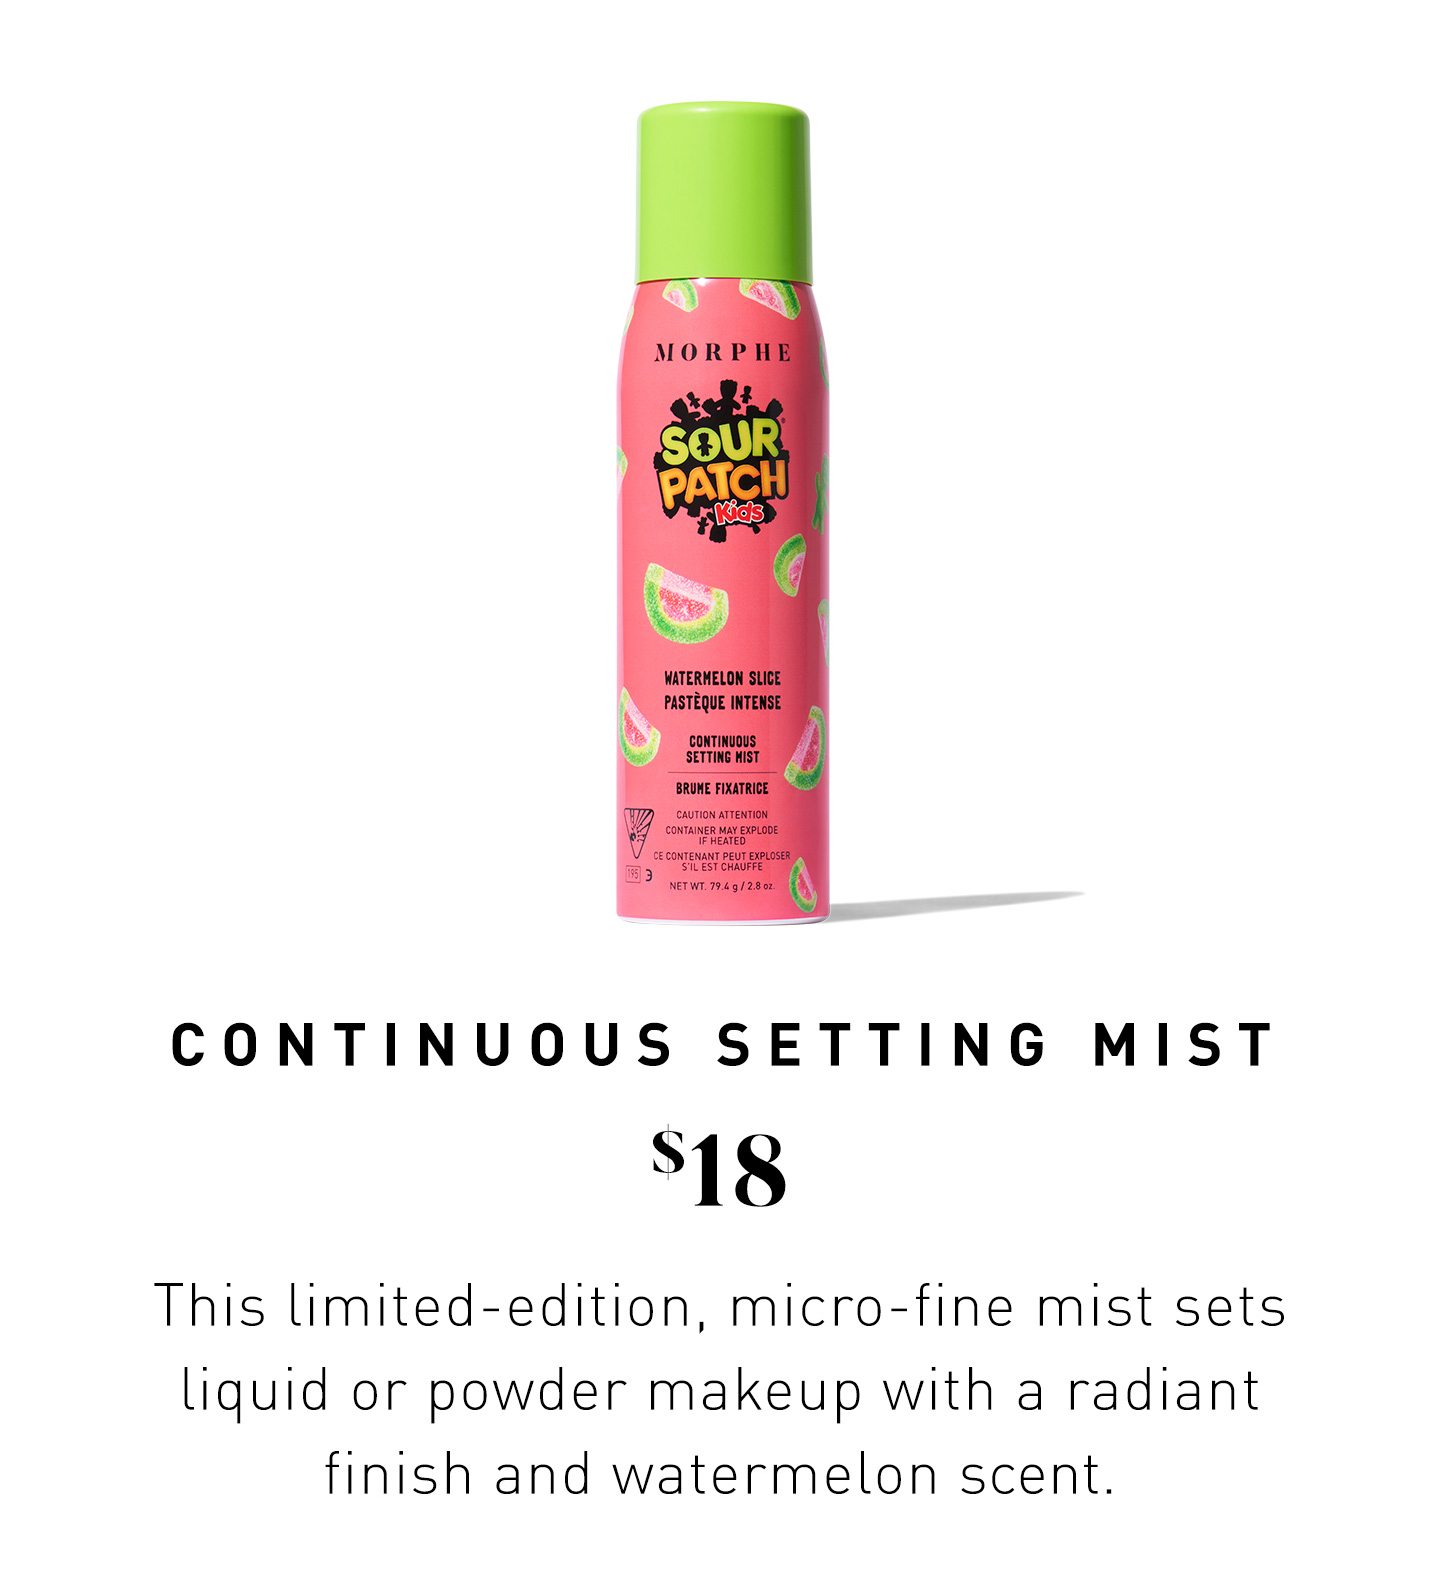 WATERMELON SLICE CONTINUOUS SETTING MIST $18 This limited-edition, micro-fine mist sets liquid or powder makeup with a radiant finish and watermelon scent.